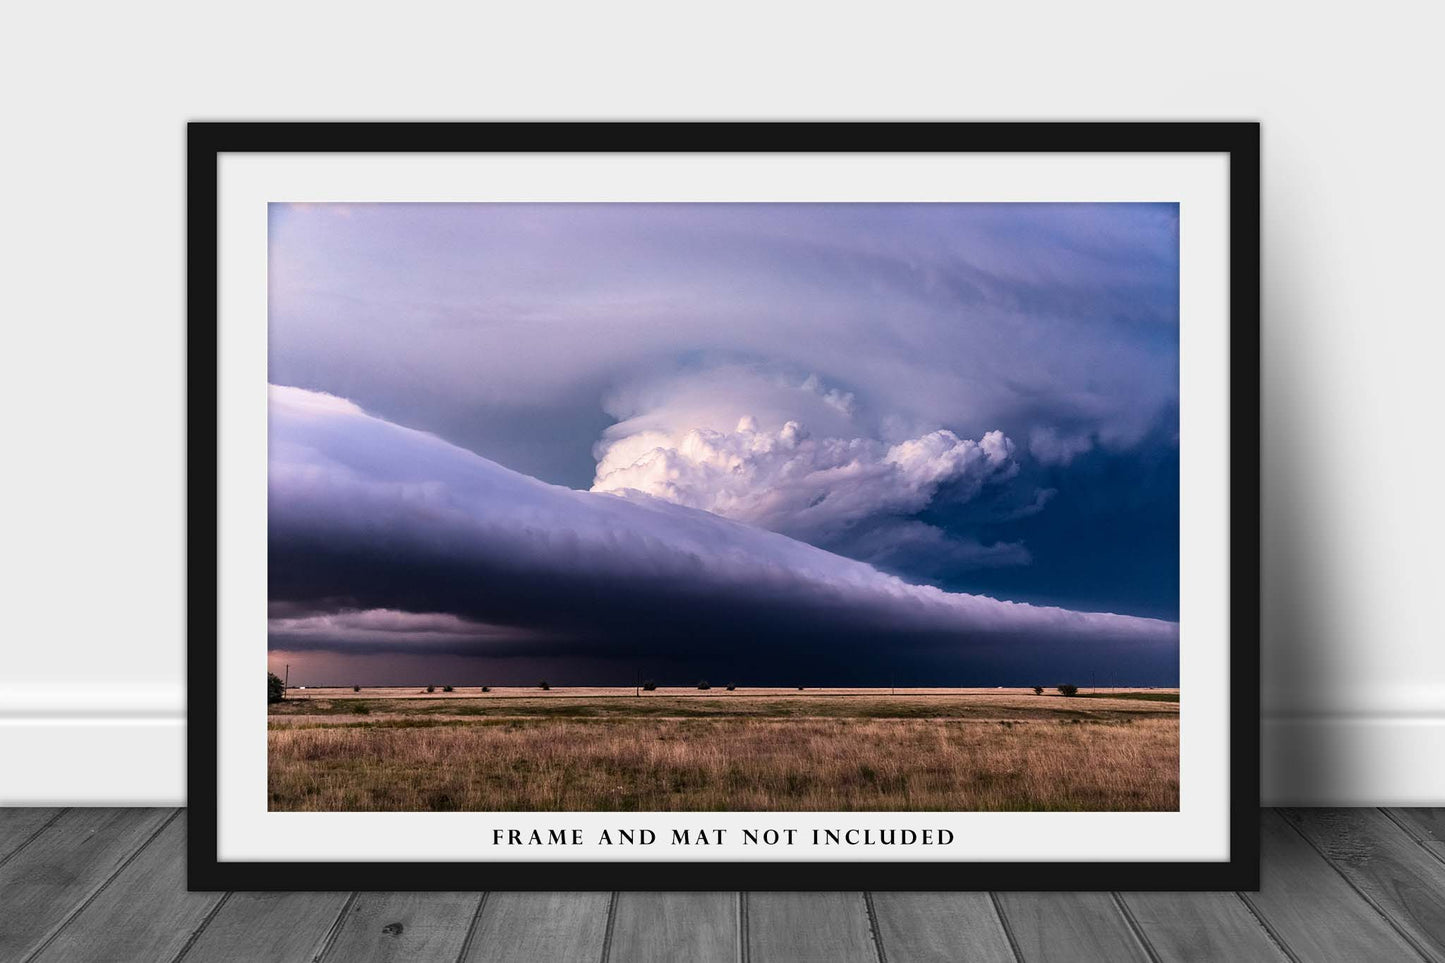 Storm Photography Print (Not Framed) Picture of Supercell Thunderstorm Spanning Horizon on Stormy Day in Texas Weather Wall Art Nature Decor